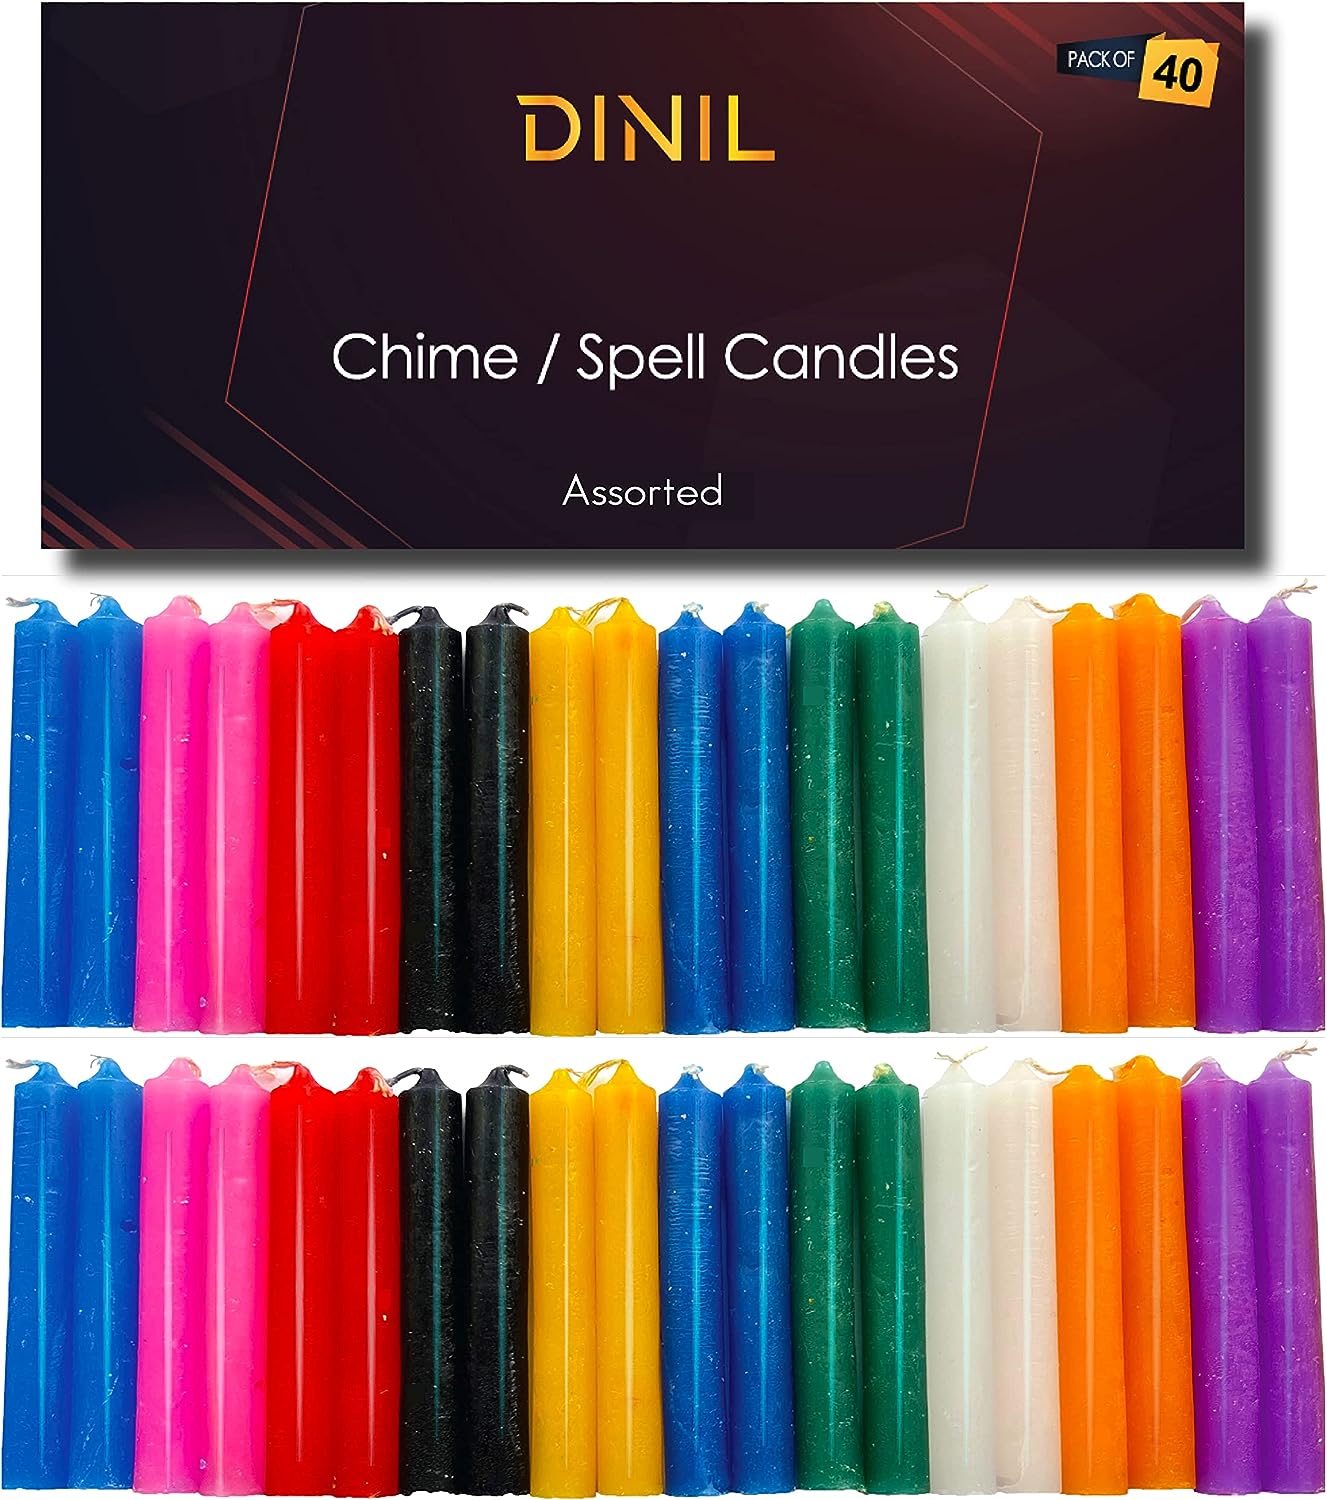 Dinil – Spell & Chime Candles (40 Assorted Color) – 4